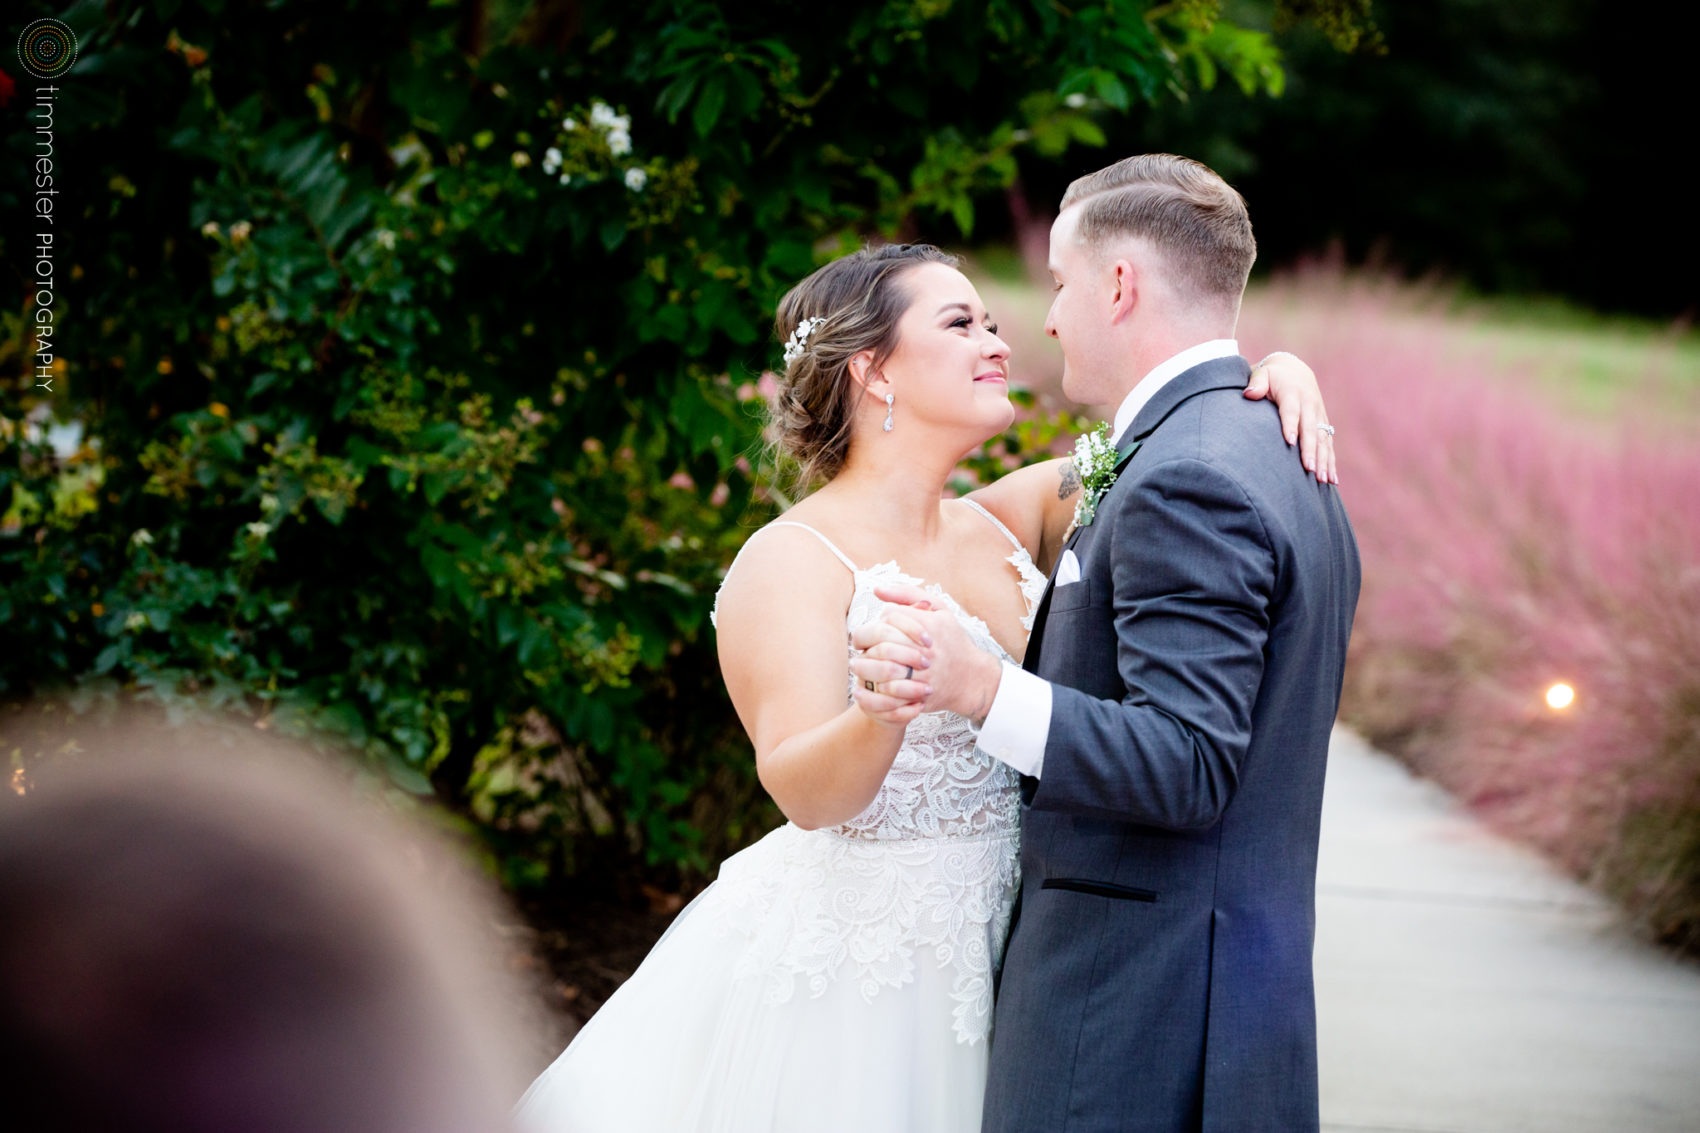 Bride and groom's first dance at Sugarneck